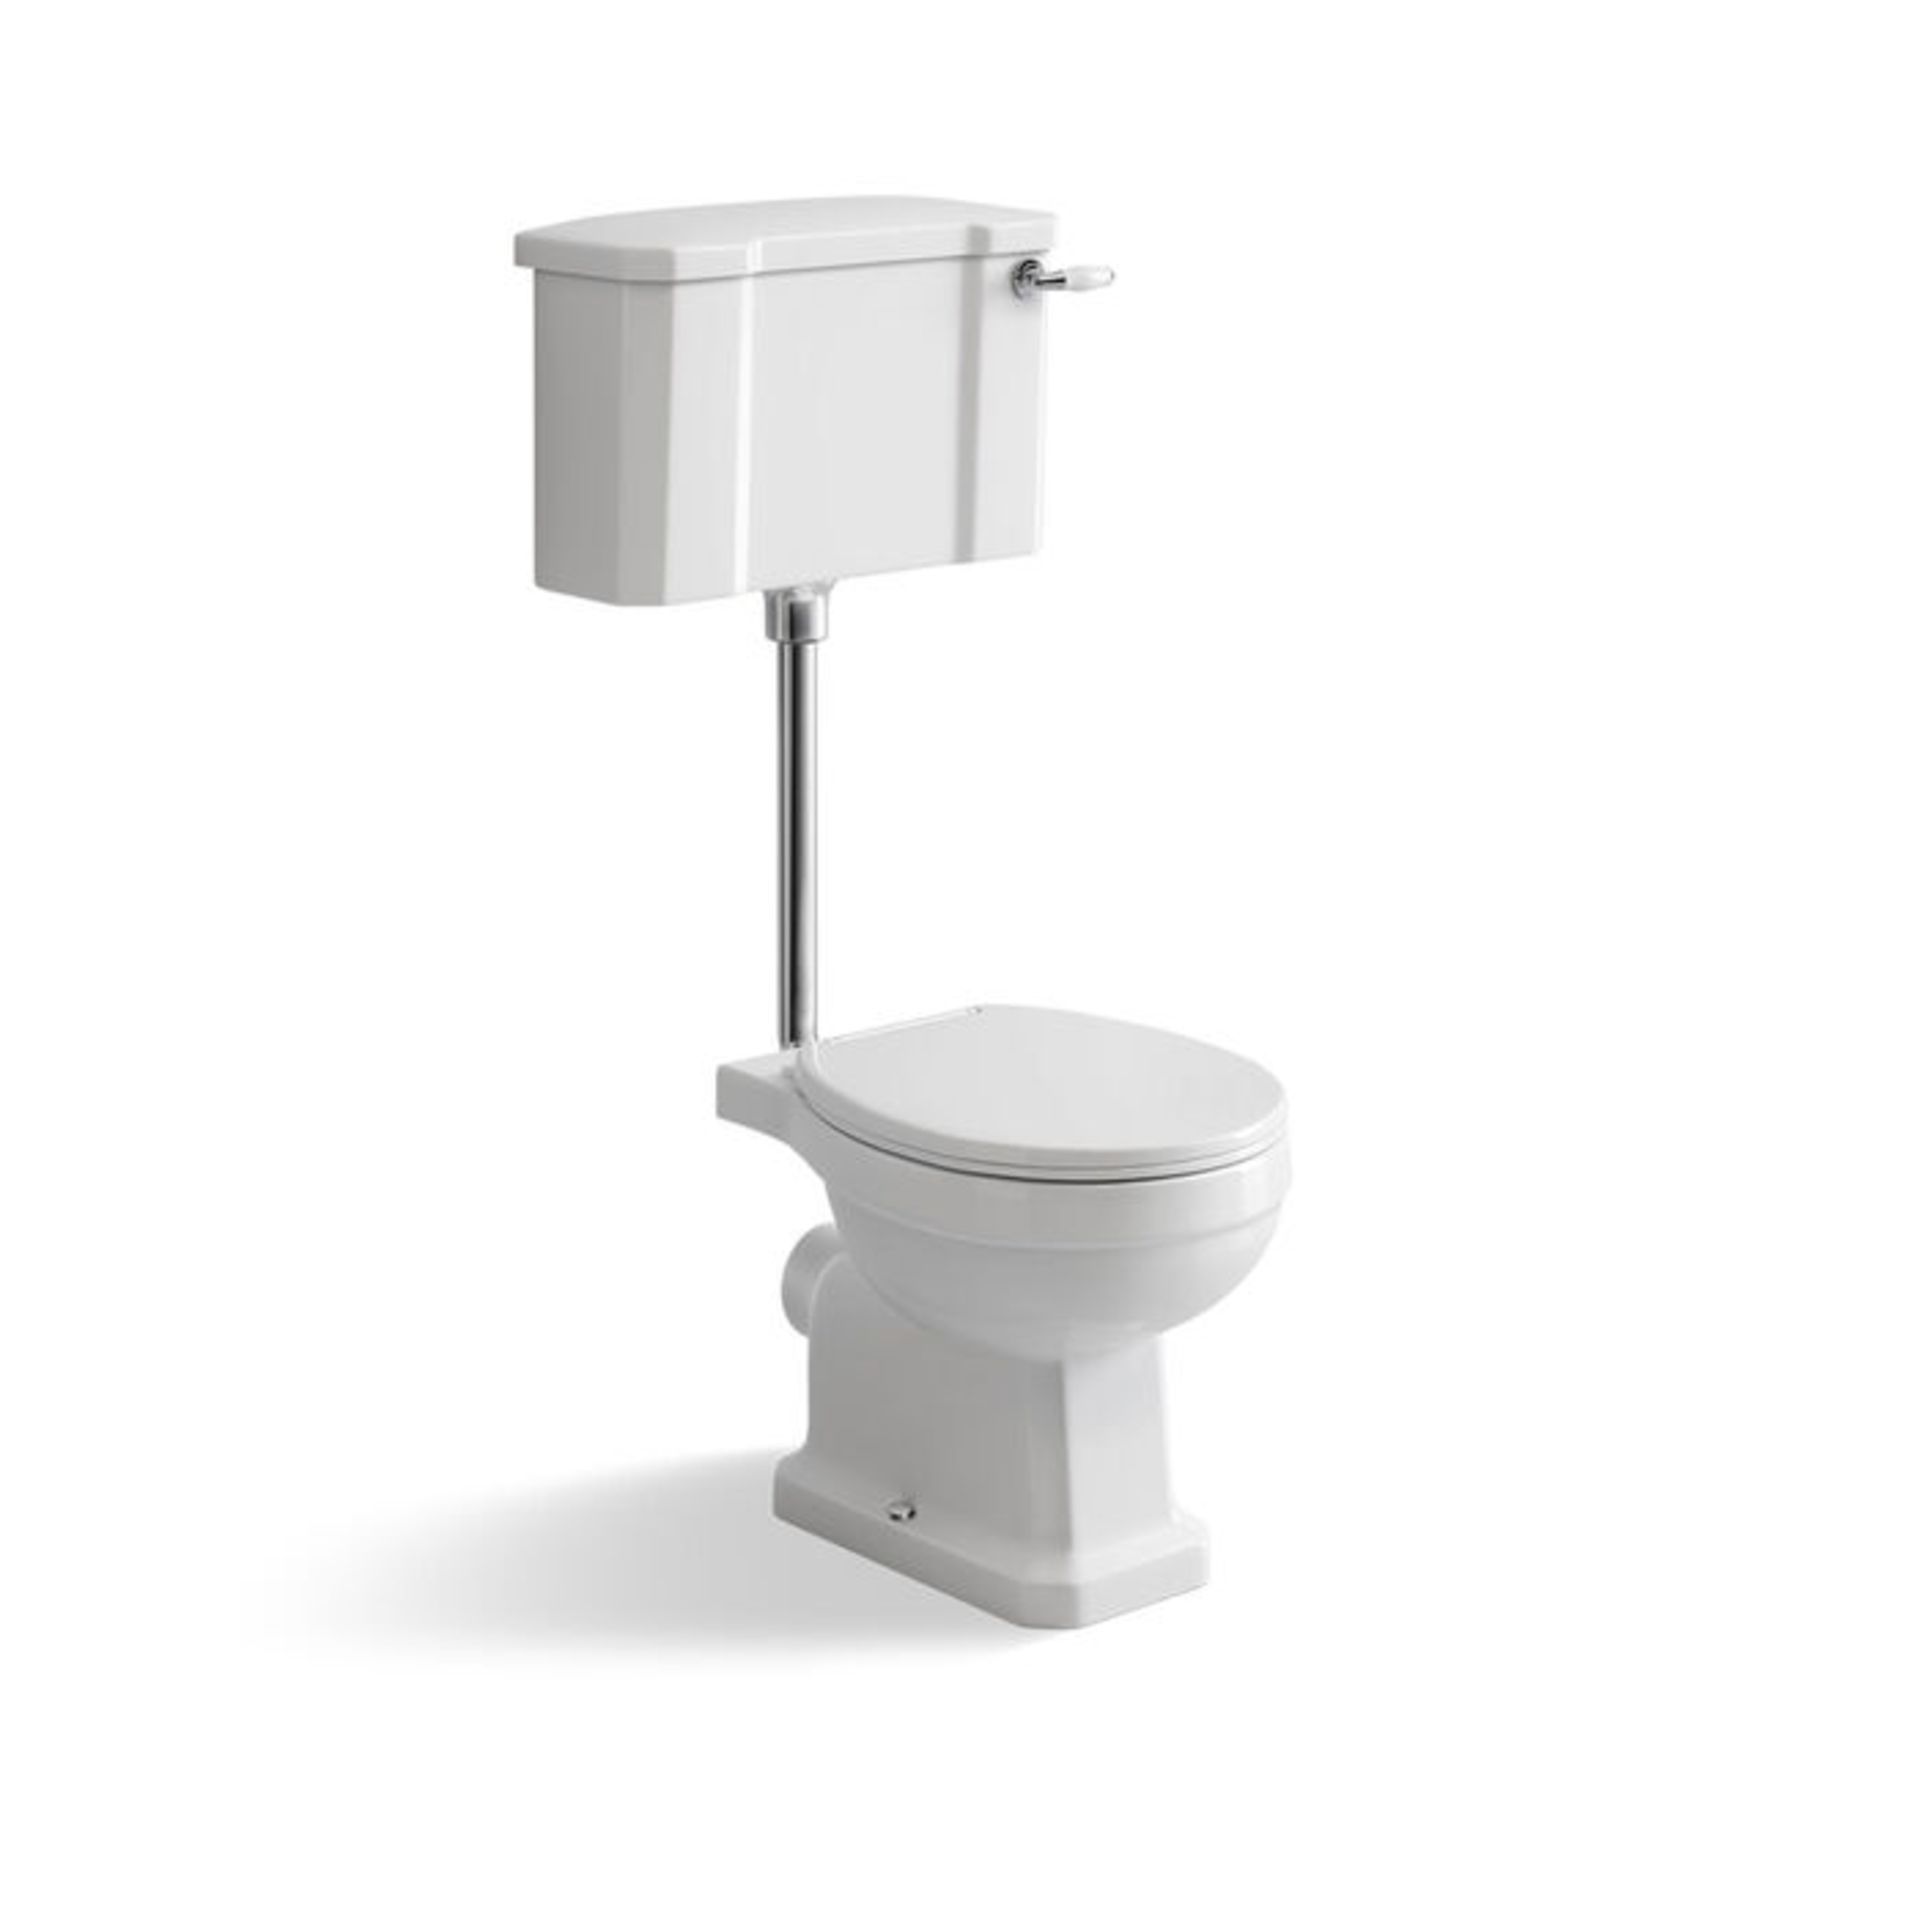 NEW & BOXED Tradiational Cambridge Low-Level Cistern Toilet- With Luxury Soft Close Seat. CCG62... - Image 3 of 3